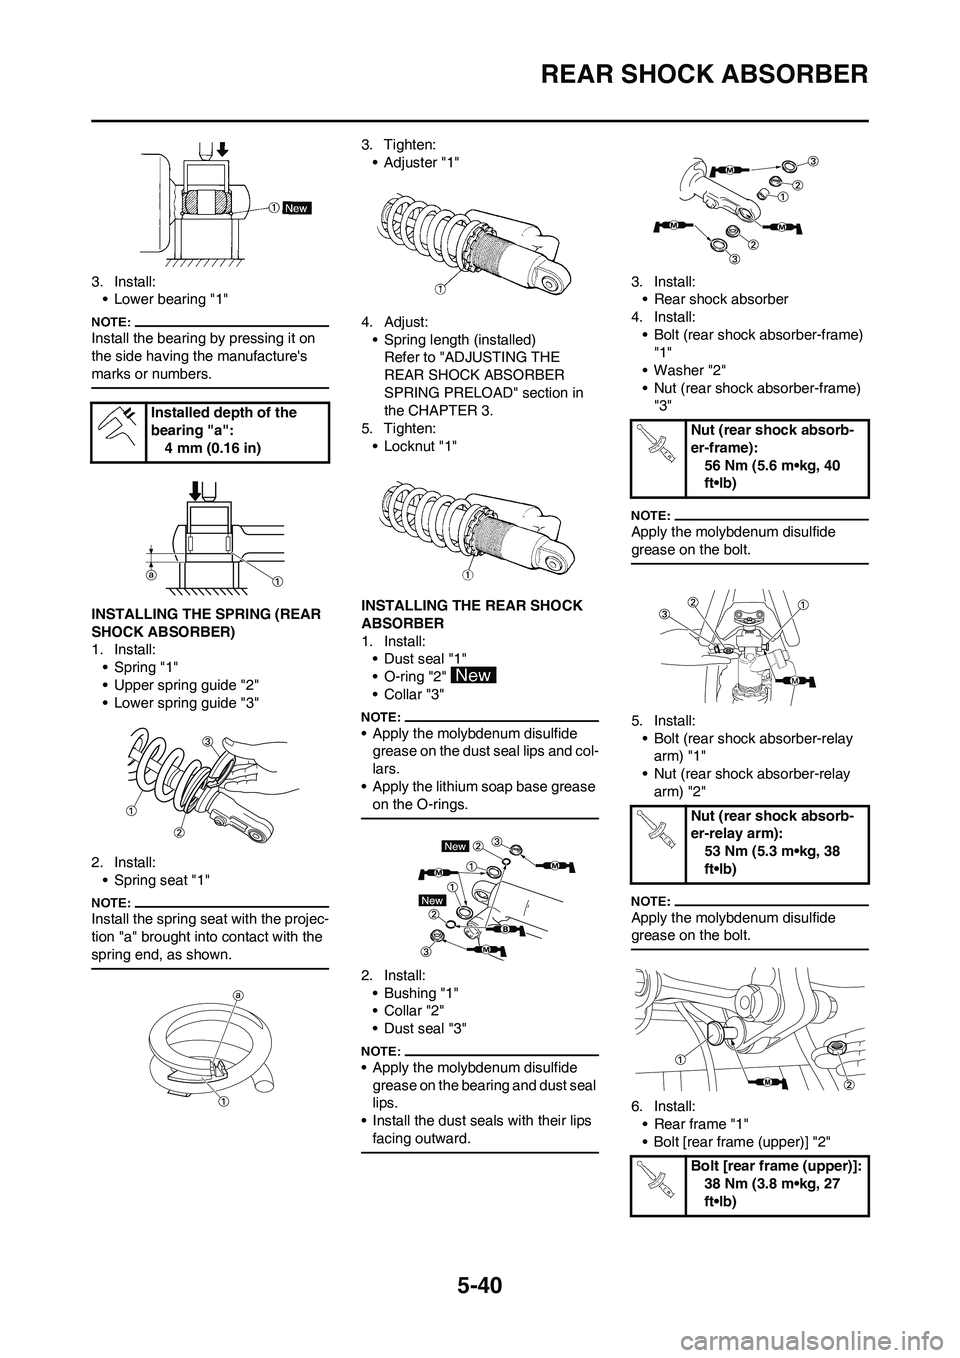 YAMAHA YZ450F 2008 User Guide 5-40
REAR SHOCK ABSORBER
3. Install:
• Lower bearing "1"
Install the bearing by pressing it on 
the side having the manufactures 
marks or numbers.
INSTALLING THE SPRING (REAR 
SHOCK ABSORBER)
1. I